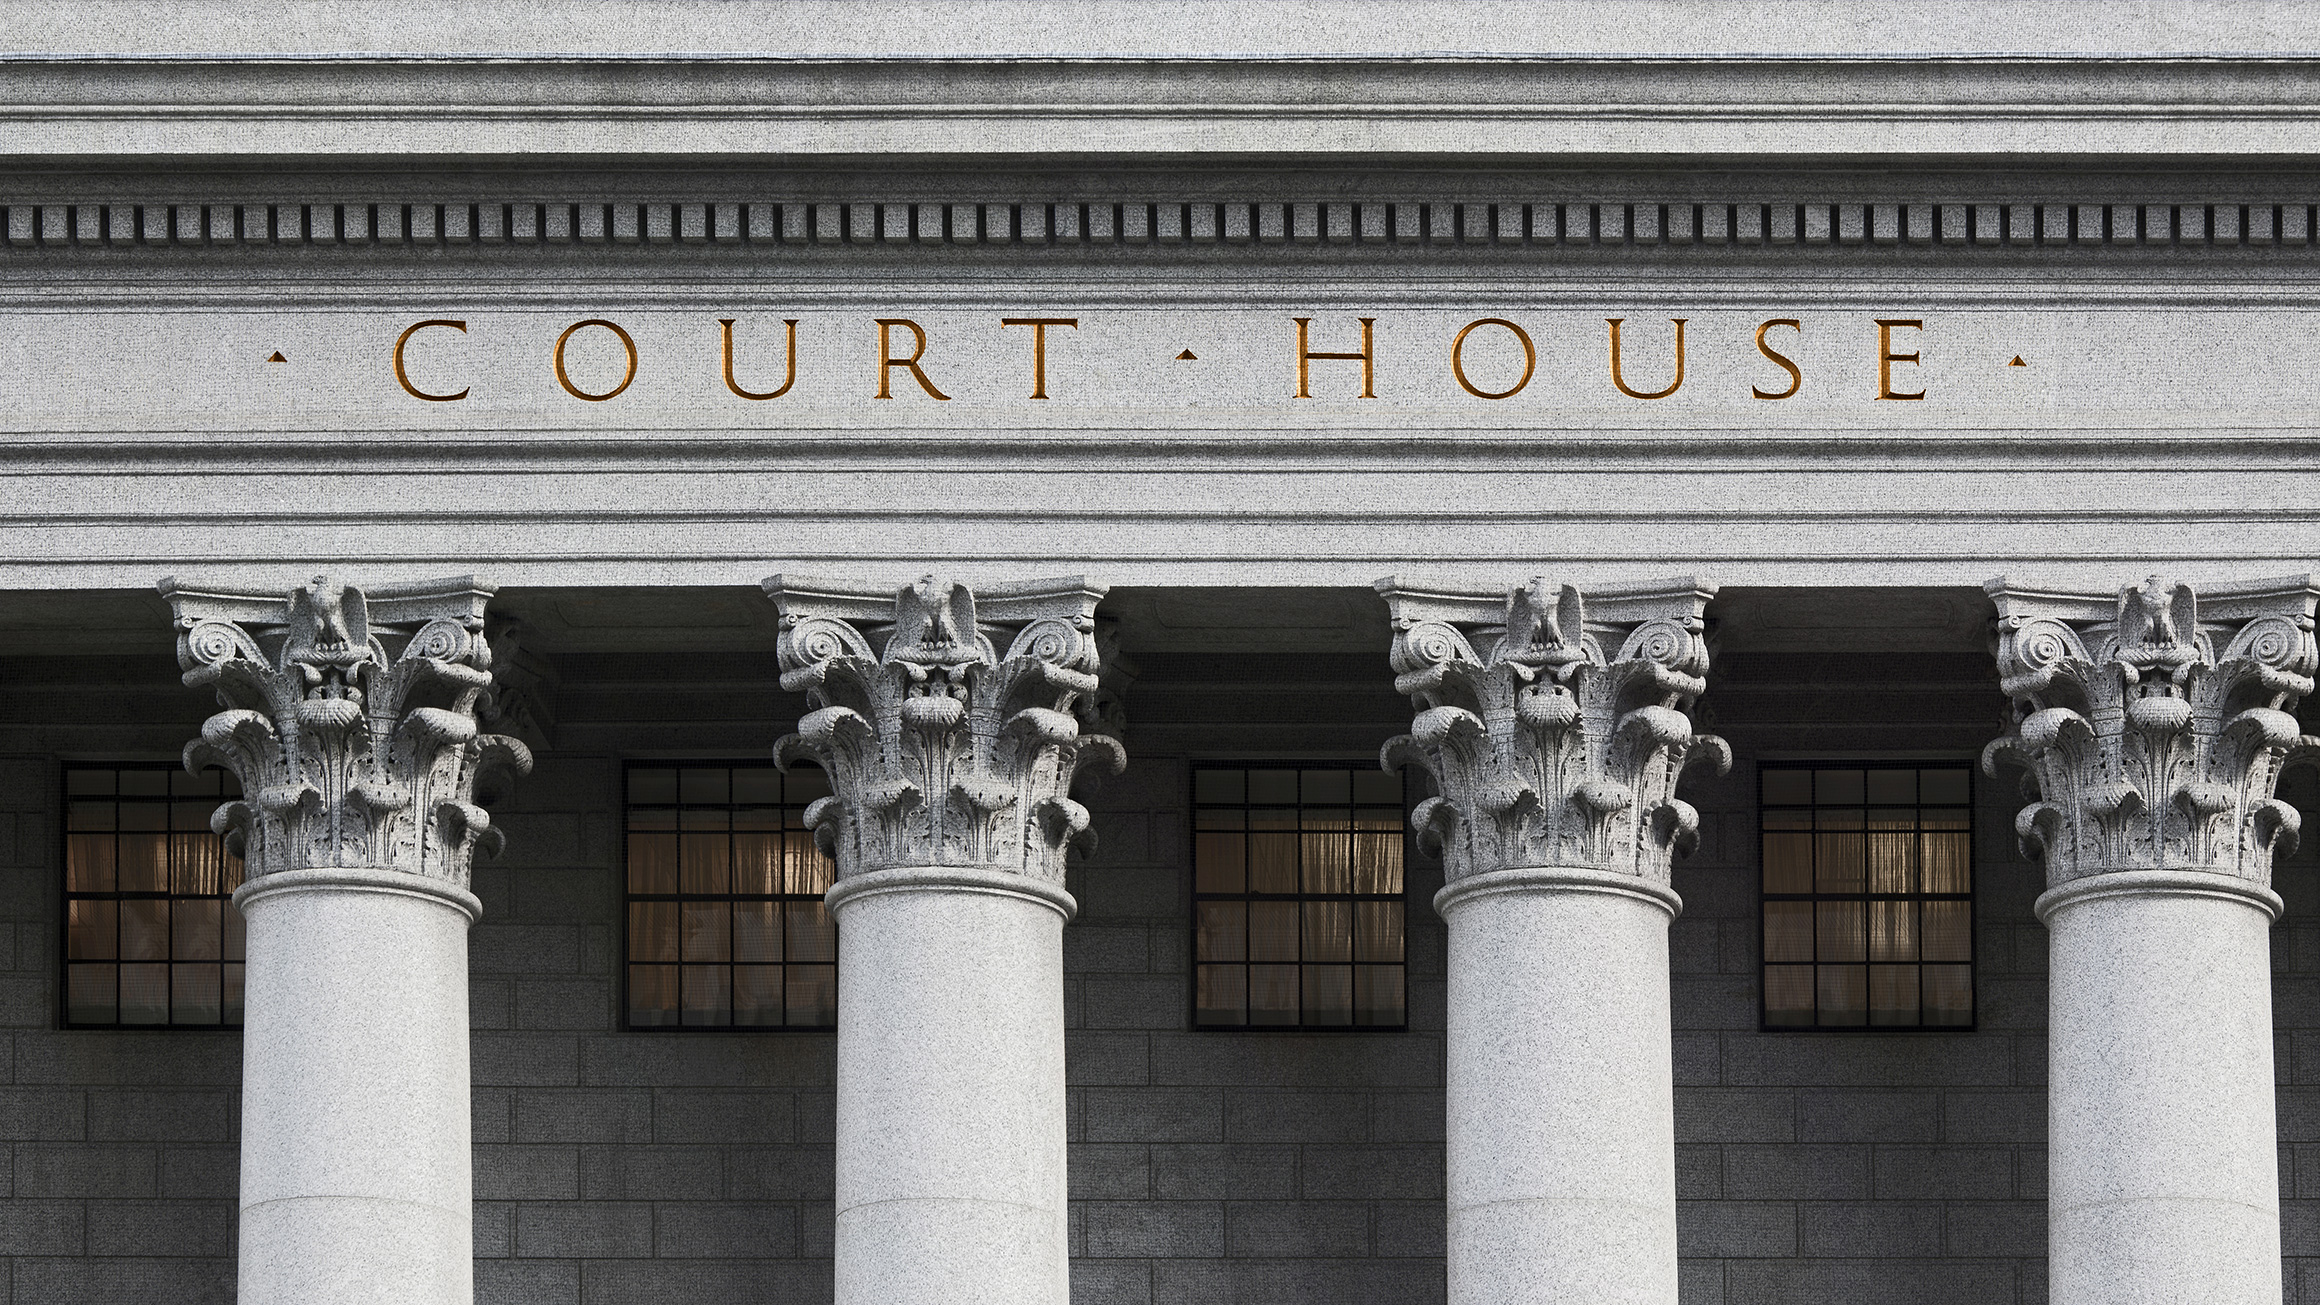 The word "courthouse" appears at the top of a building with four columns showing